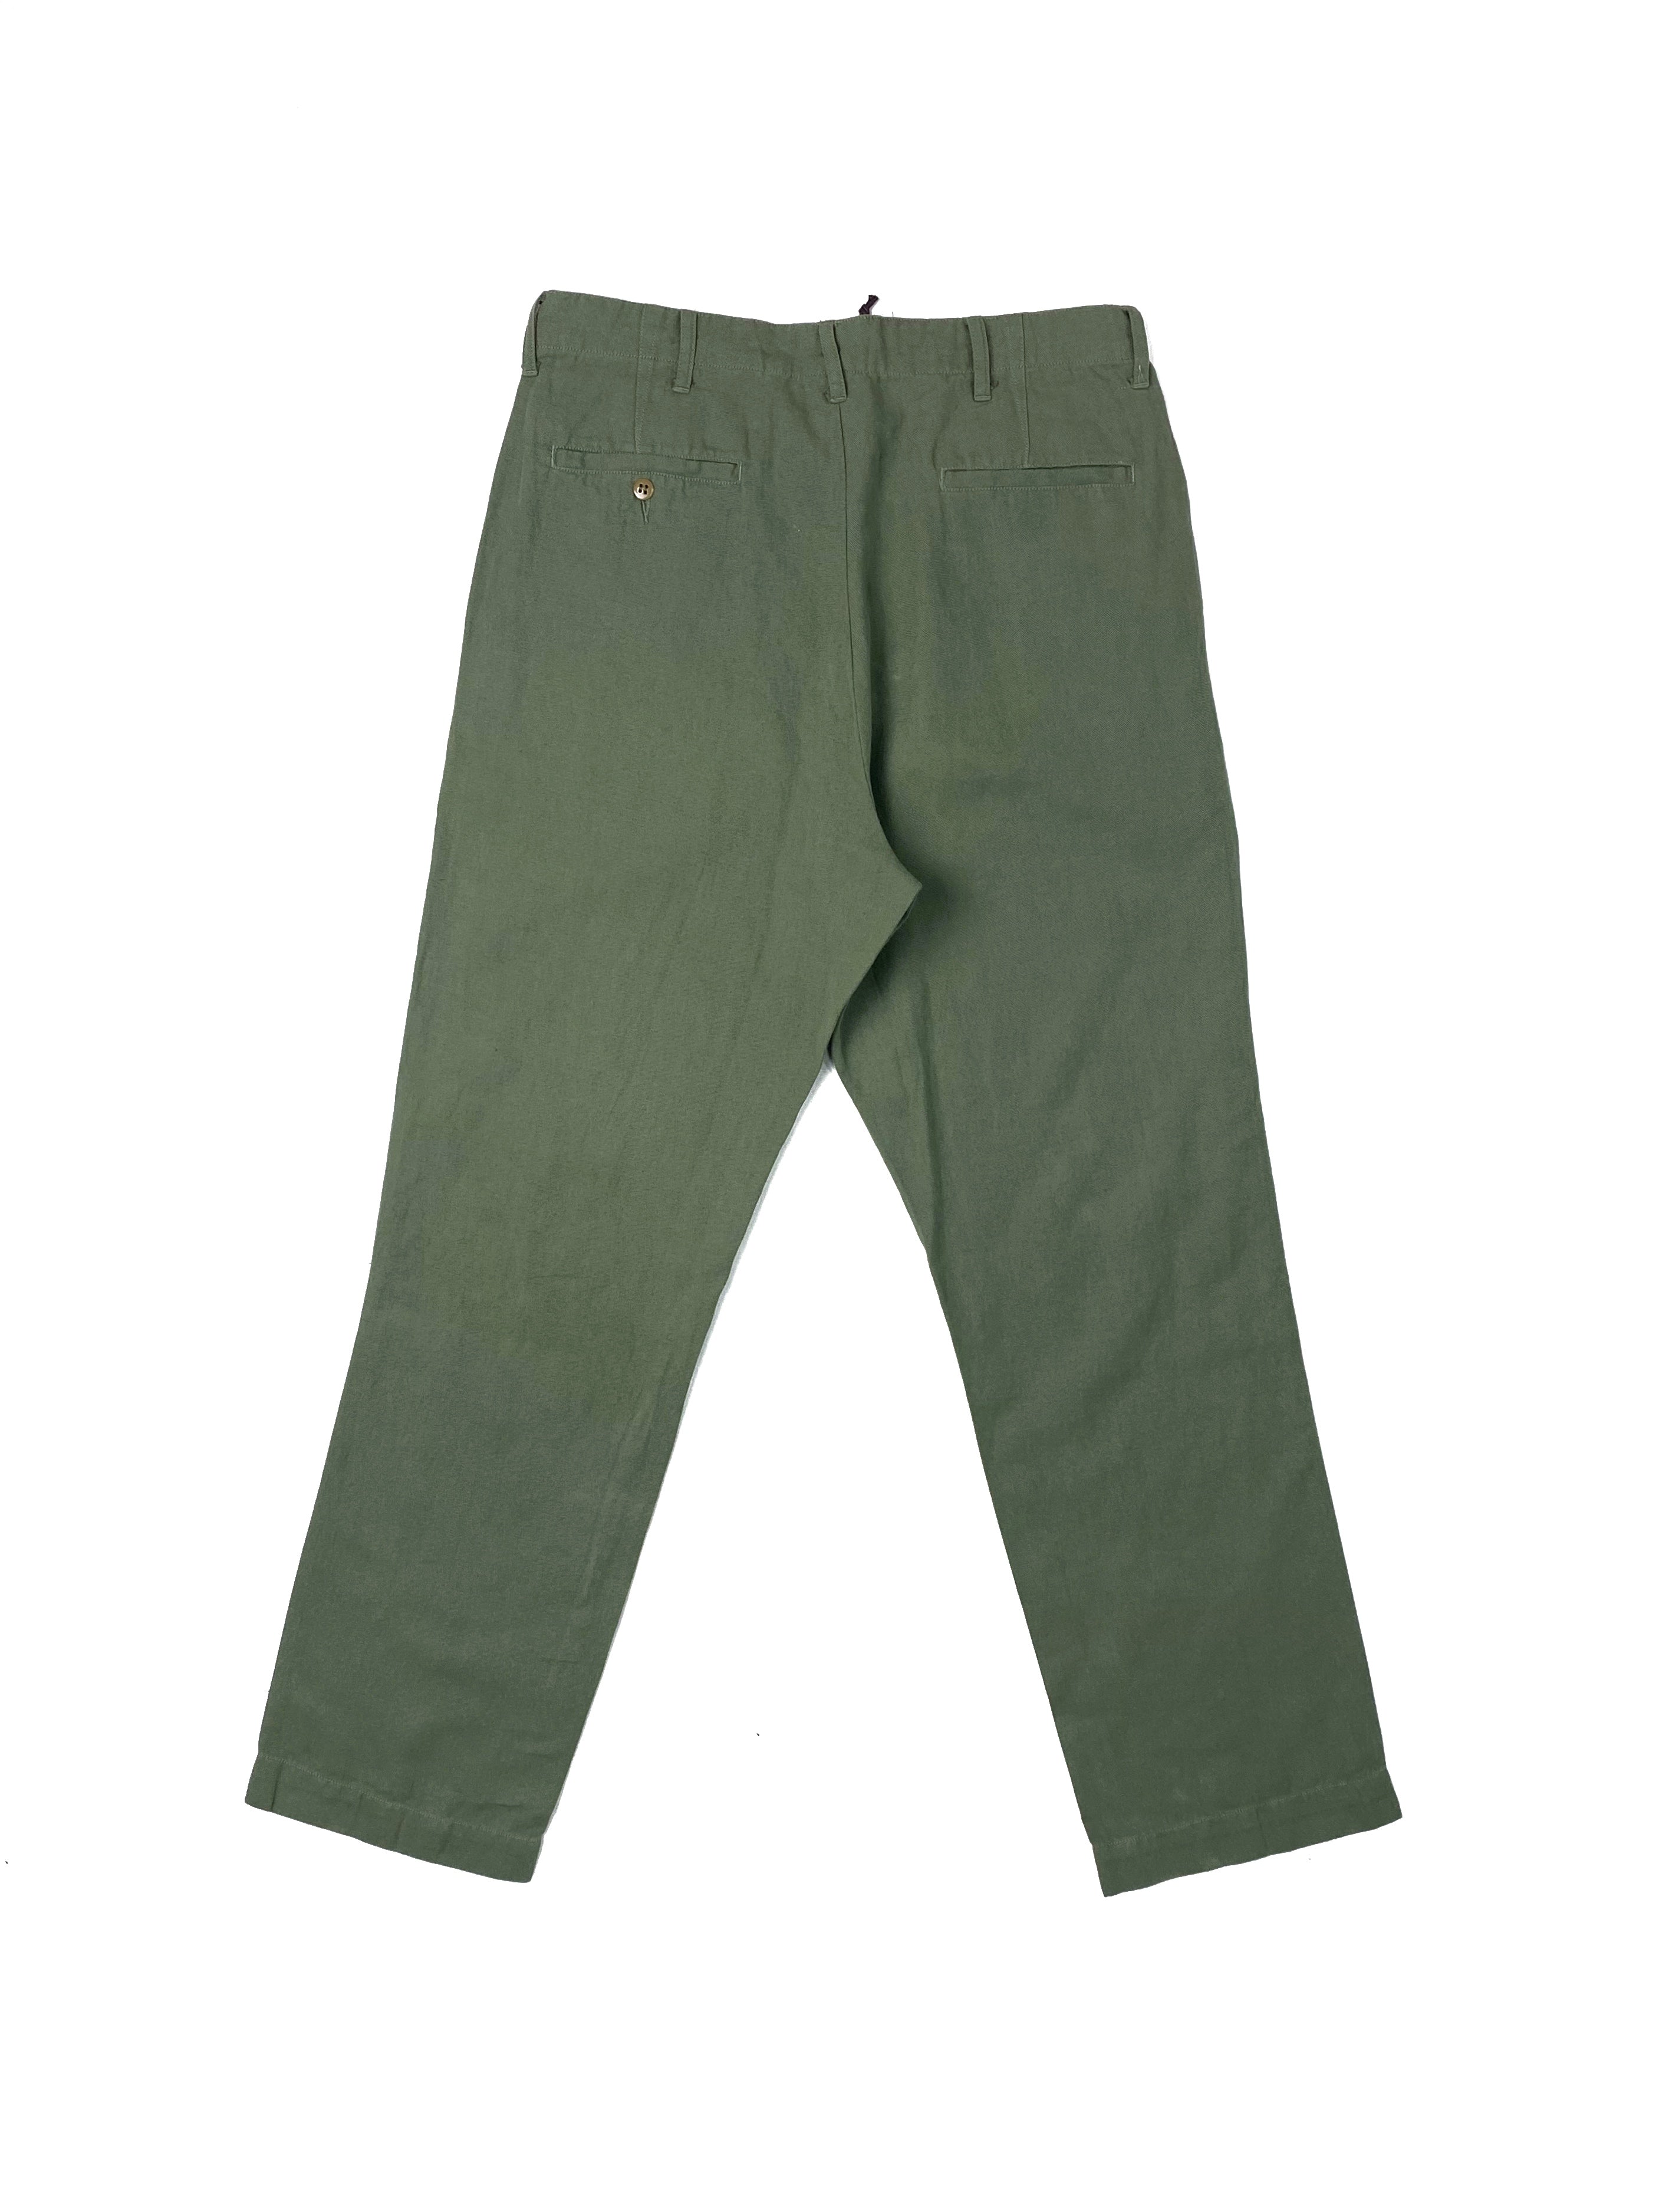 Pleated Cotton/ Linen Chinos | Faded Olive